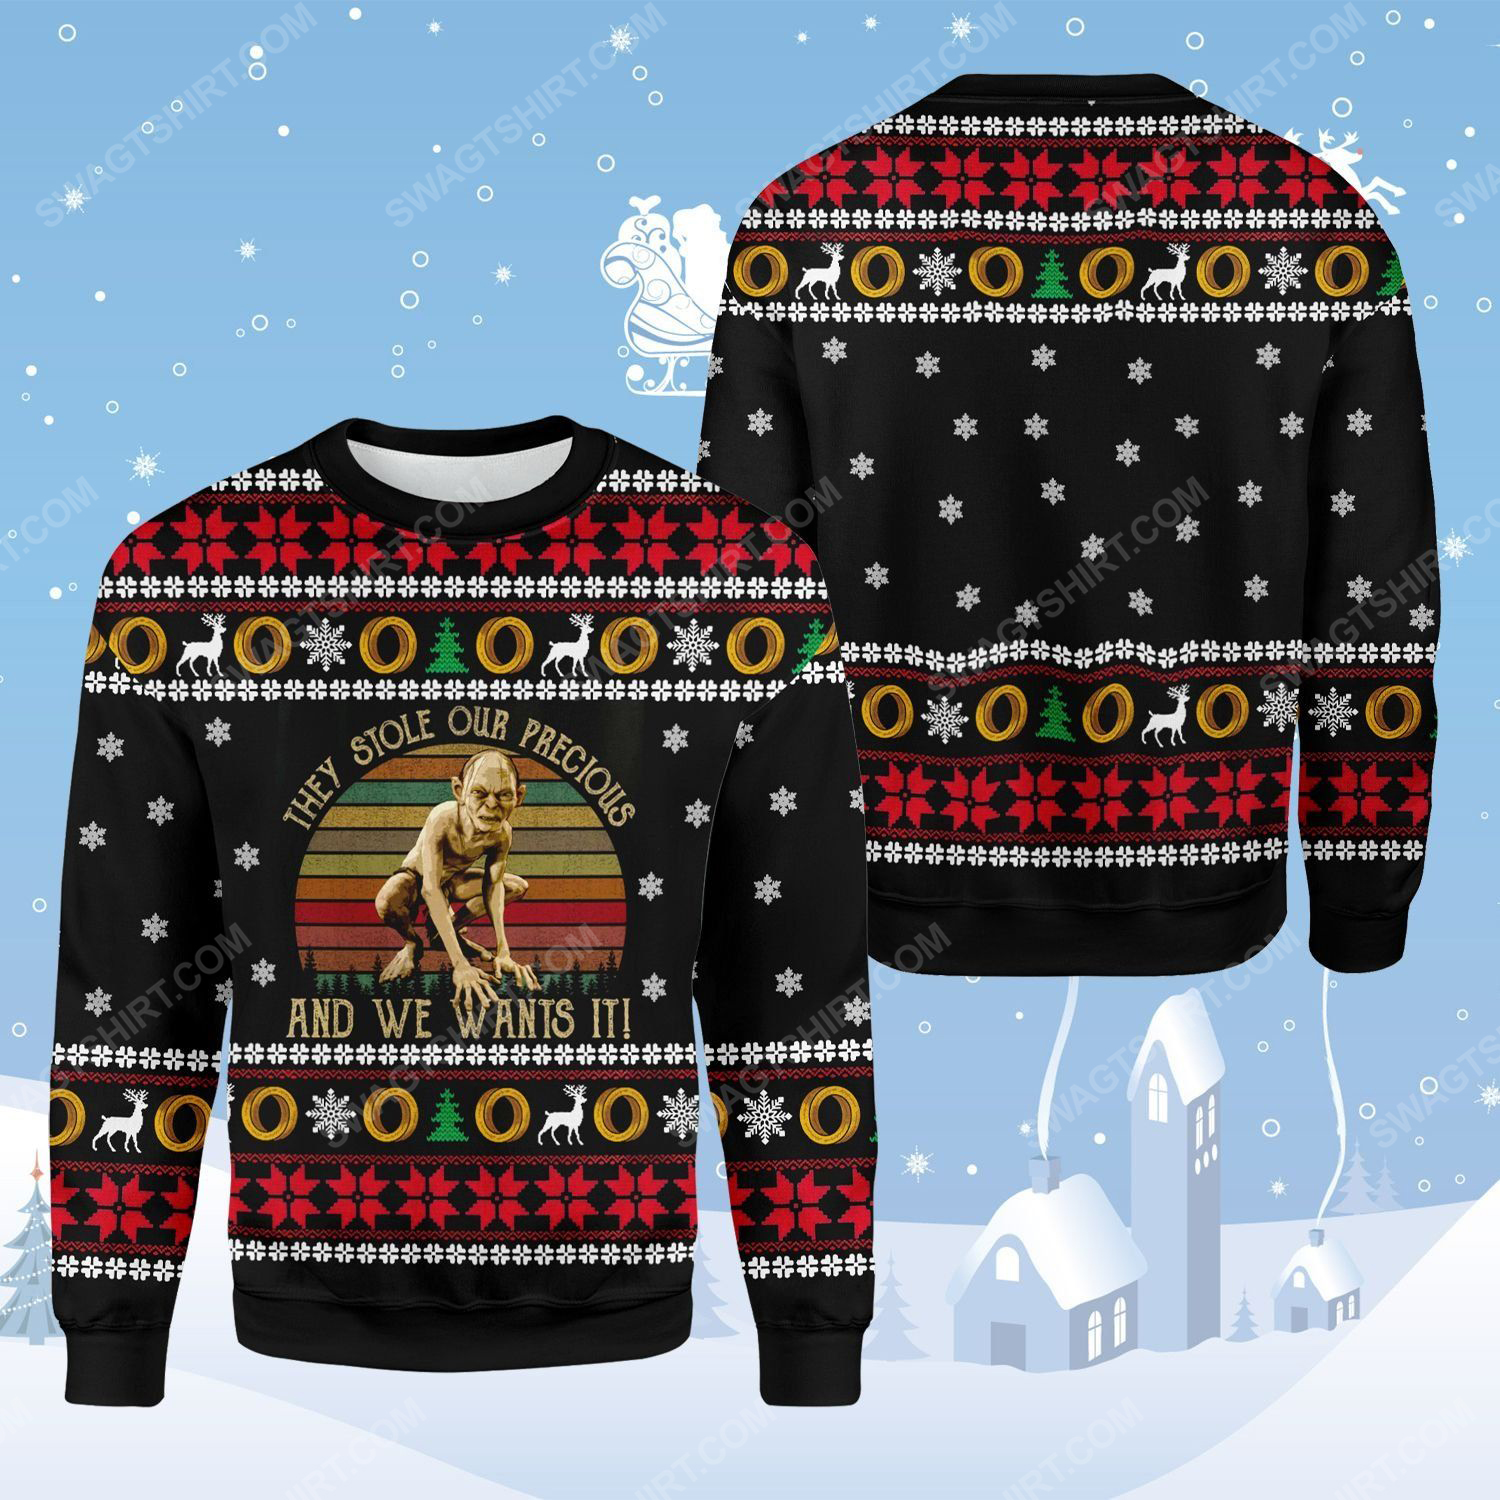 LOTR gollum they stole our precious and we wants it ugly christmas sweater